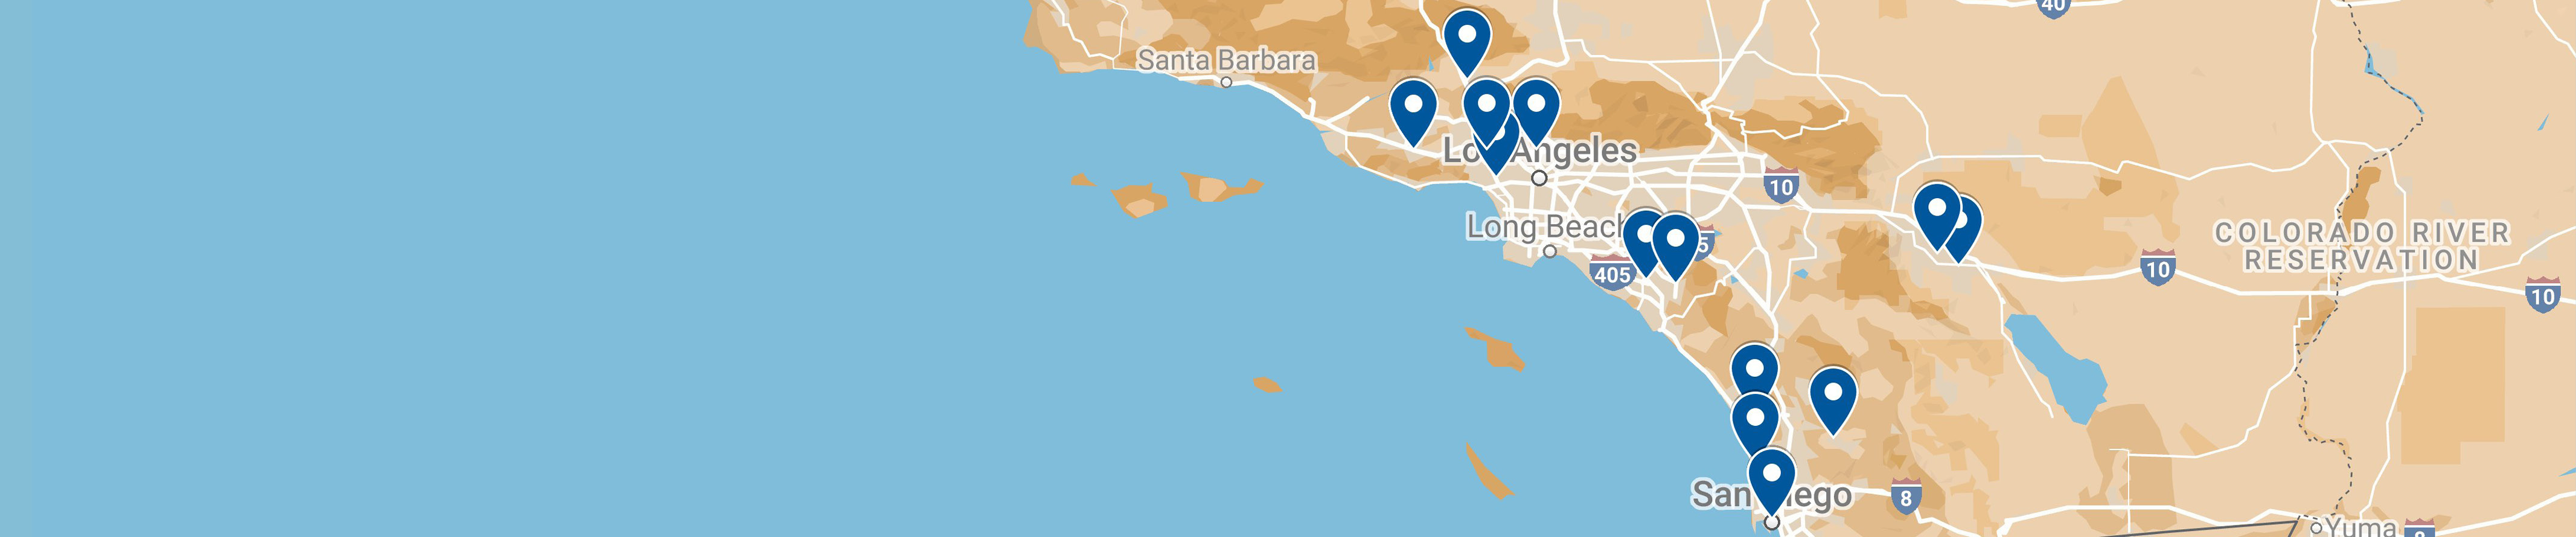 Bank of Southern California locations